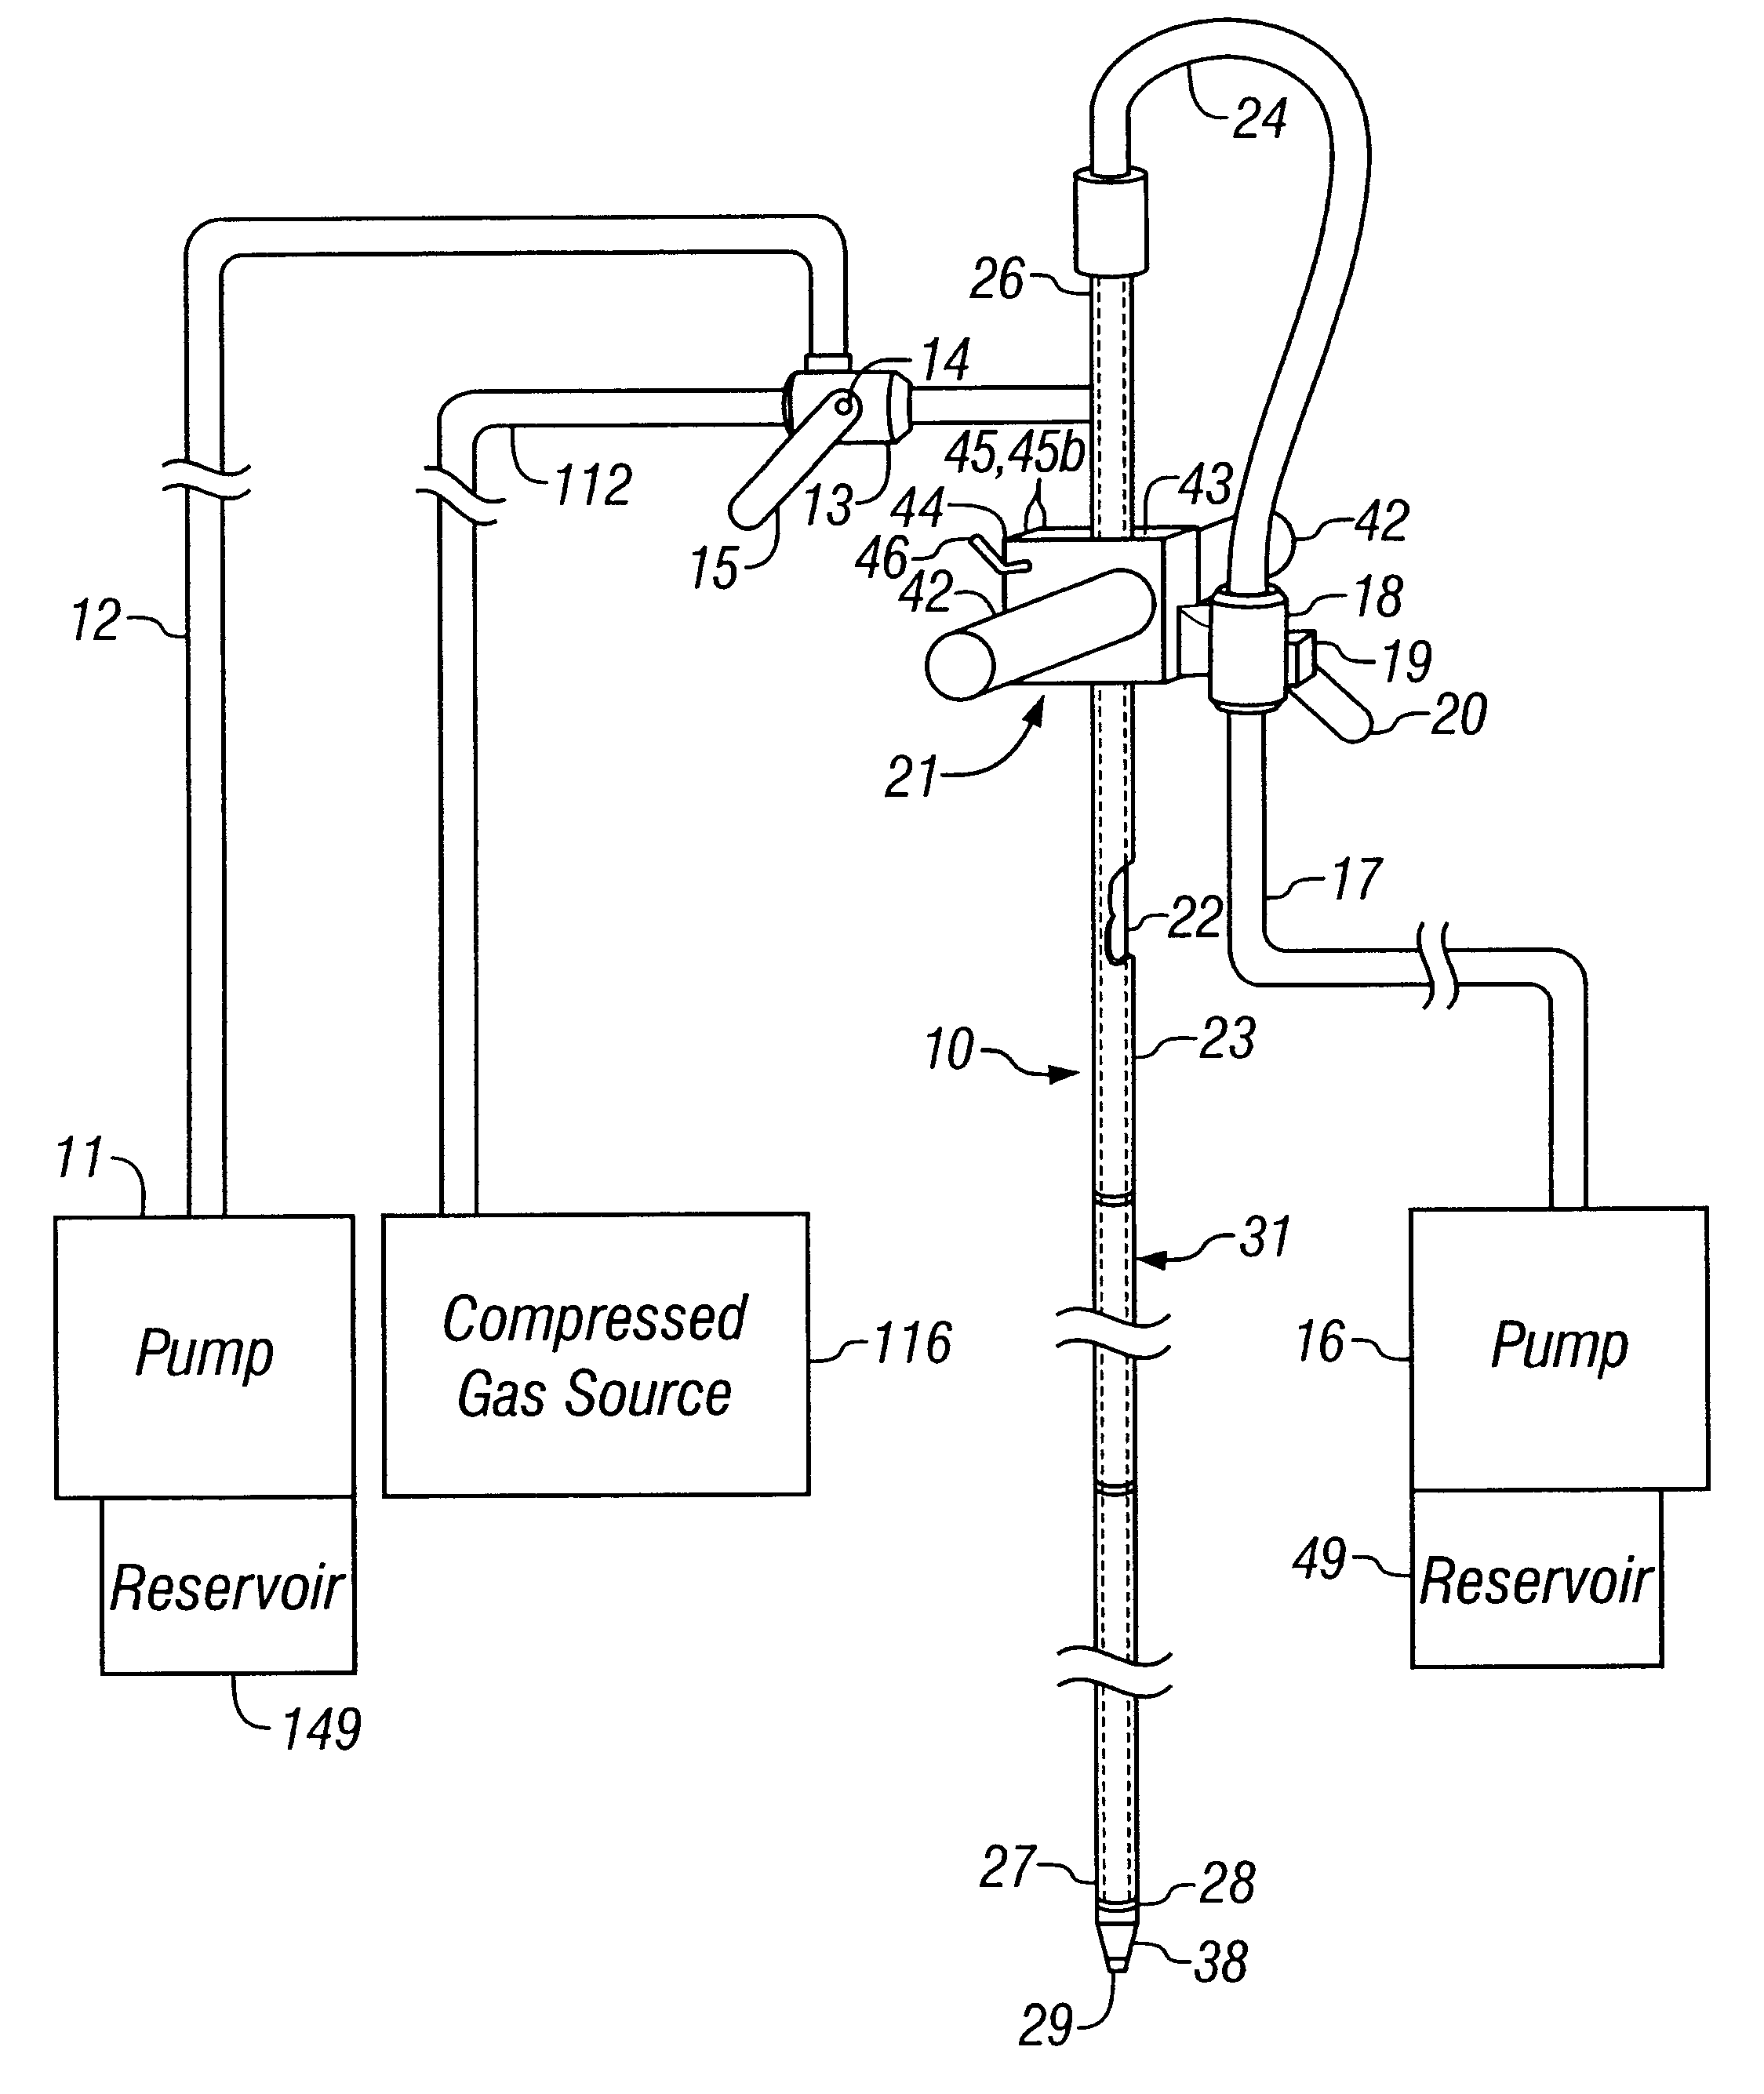 In-situ deep remediation injection system and method